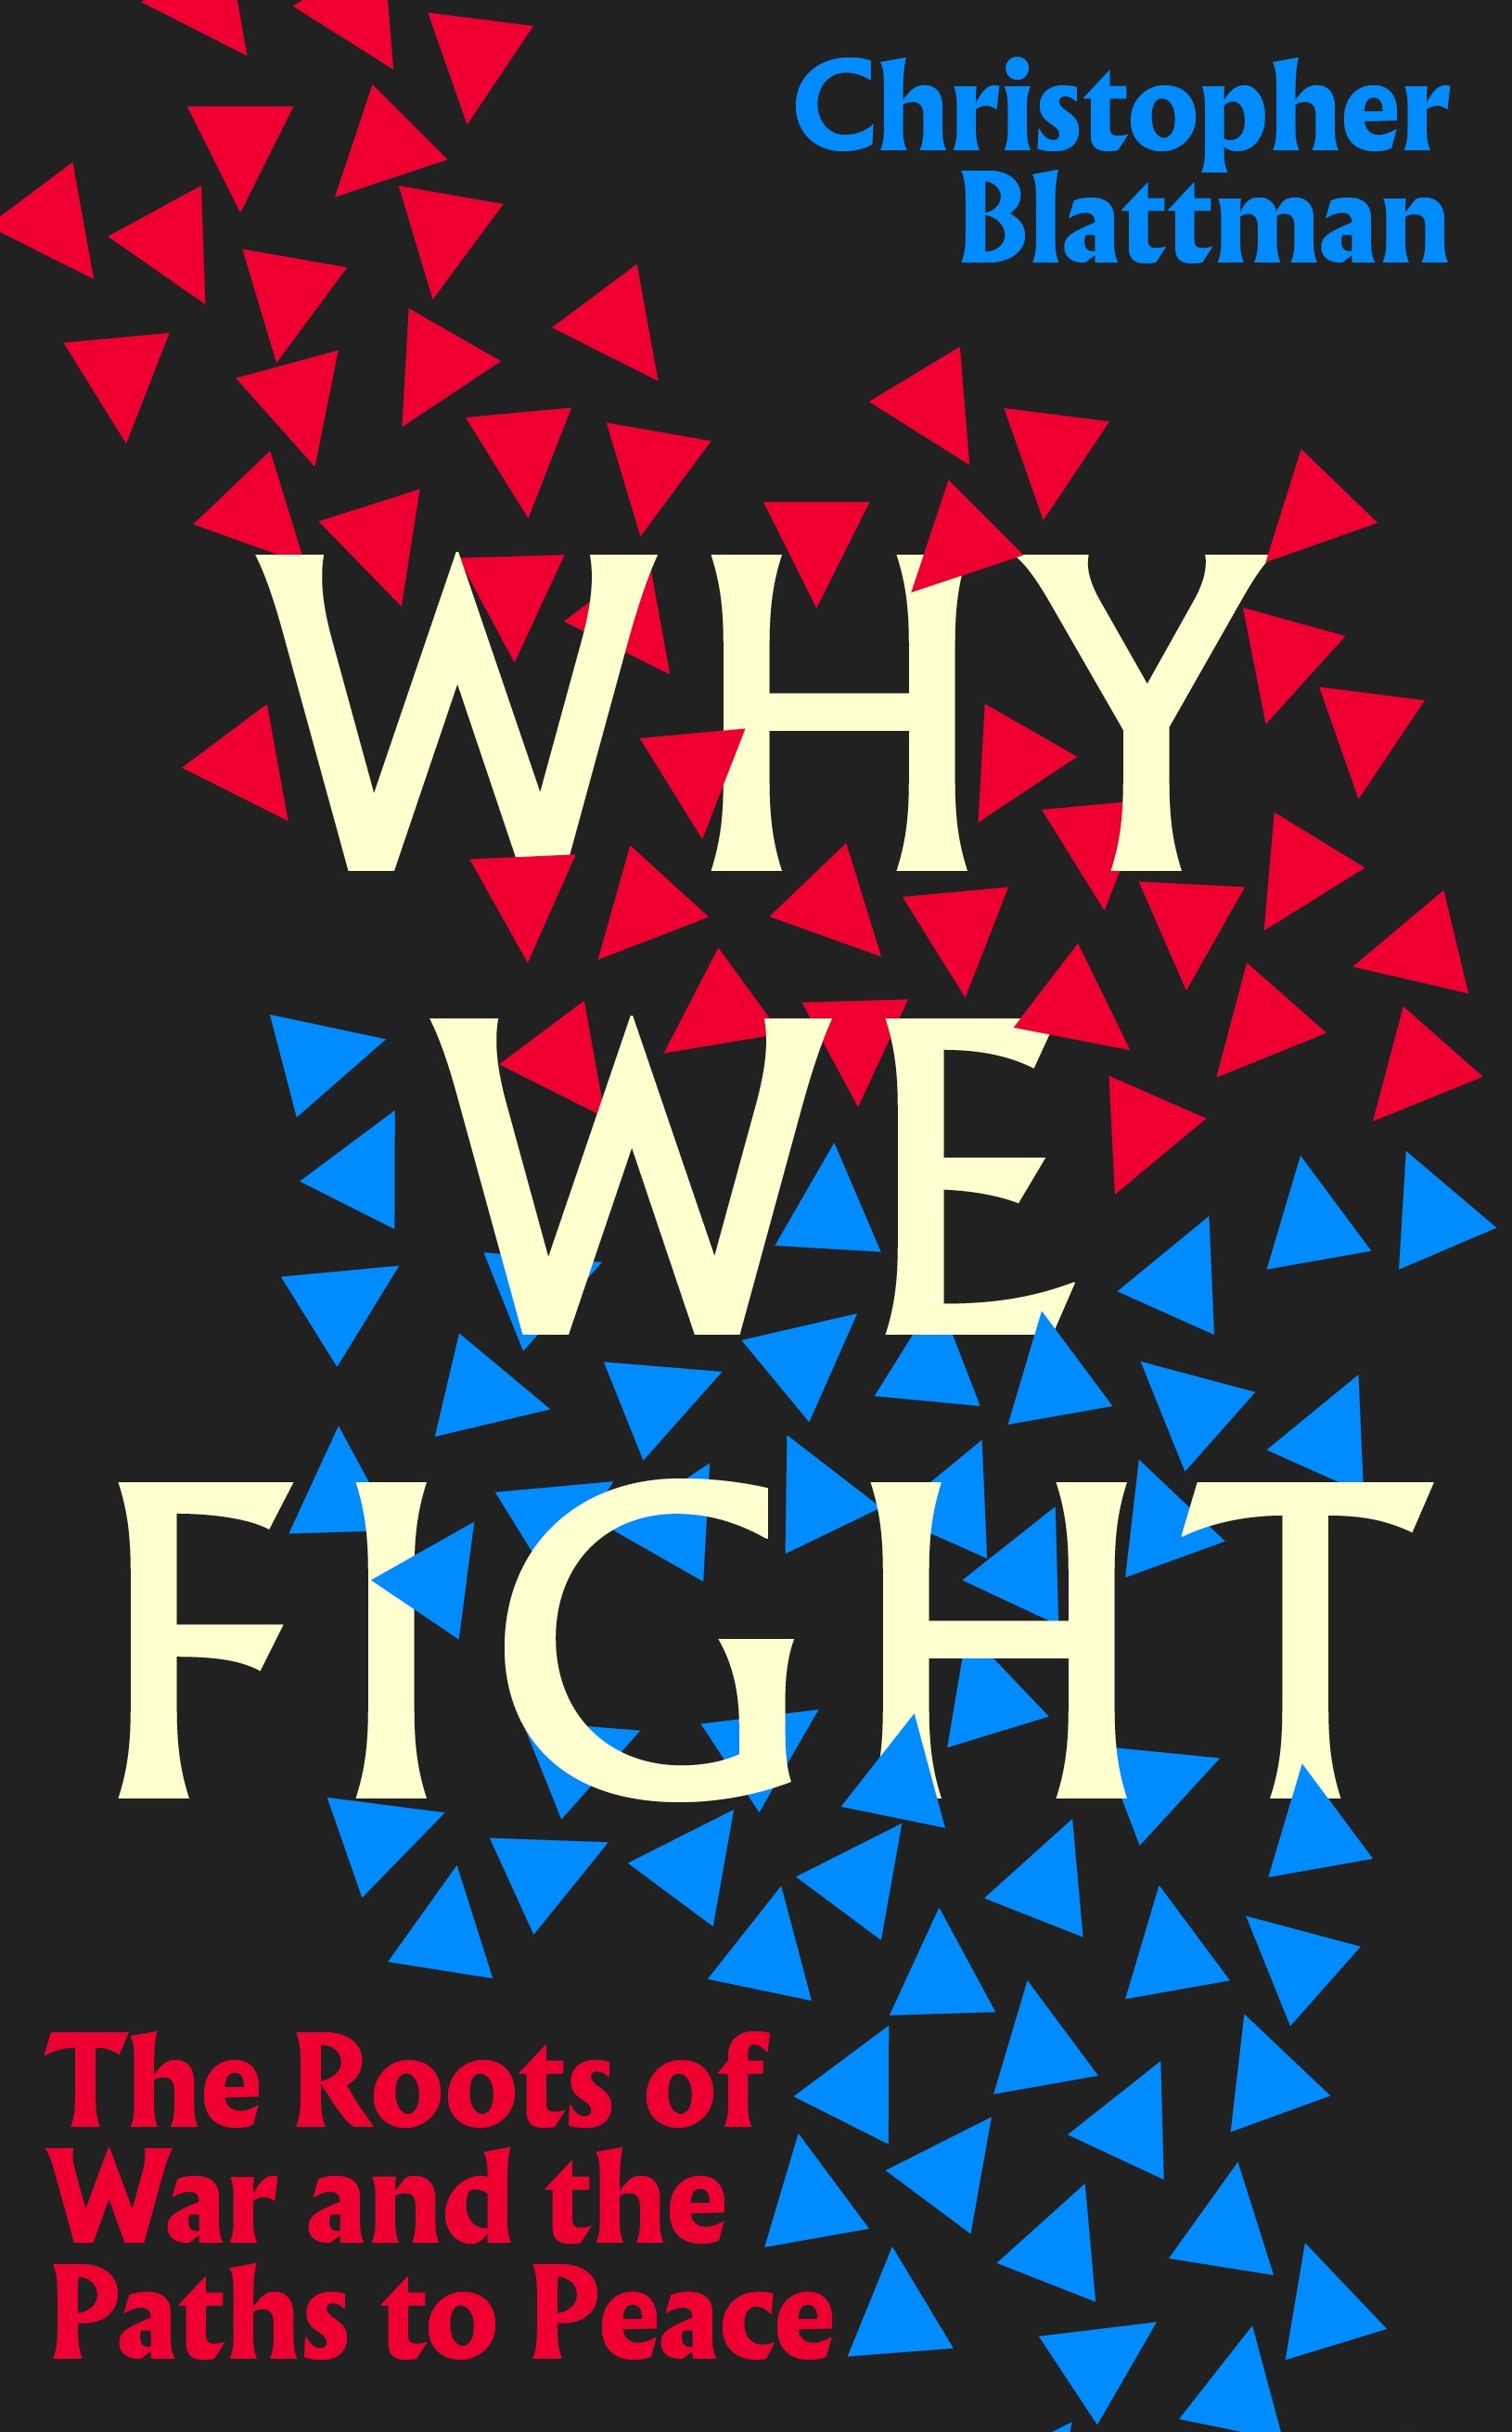 Book “Why We Fight” by Christopher Blattman — April 21, 2022